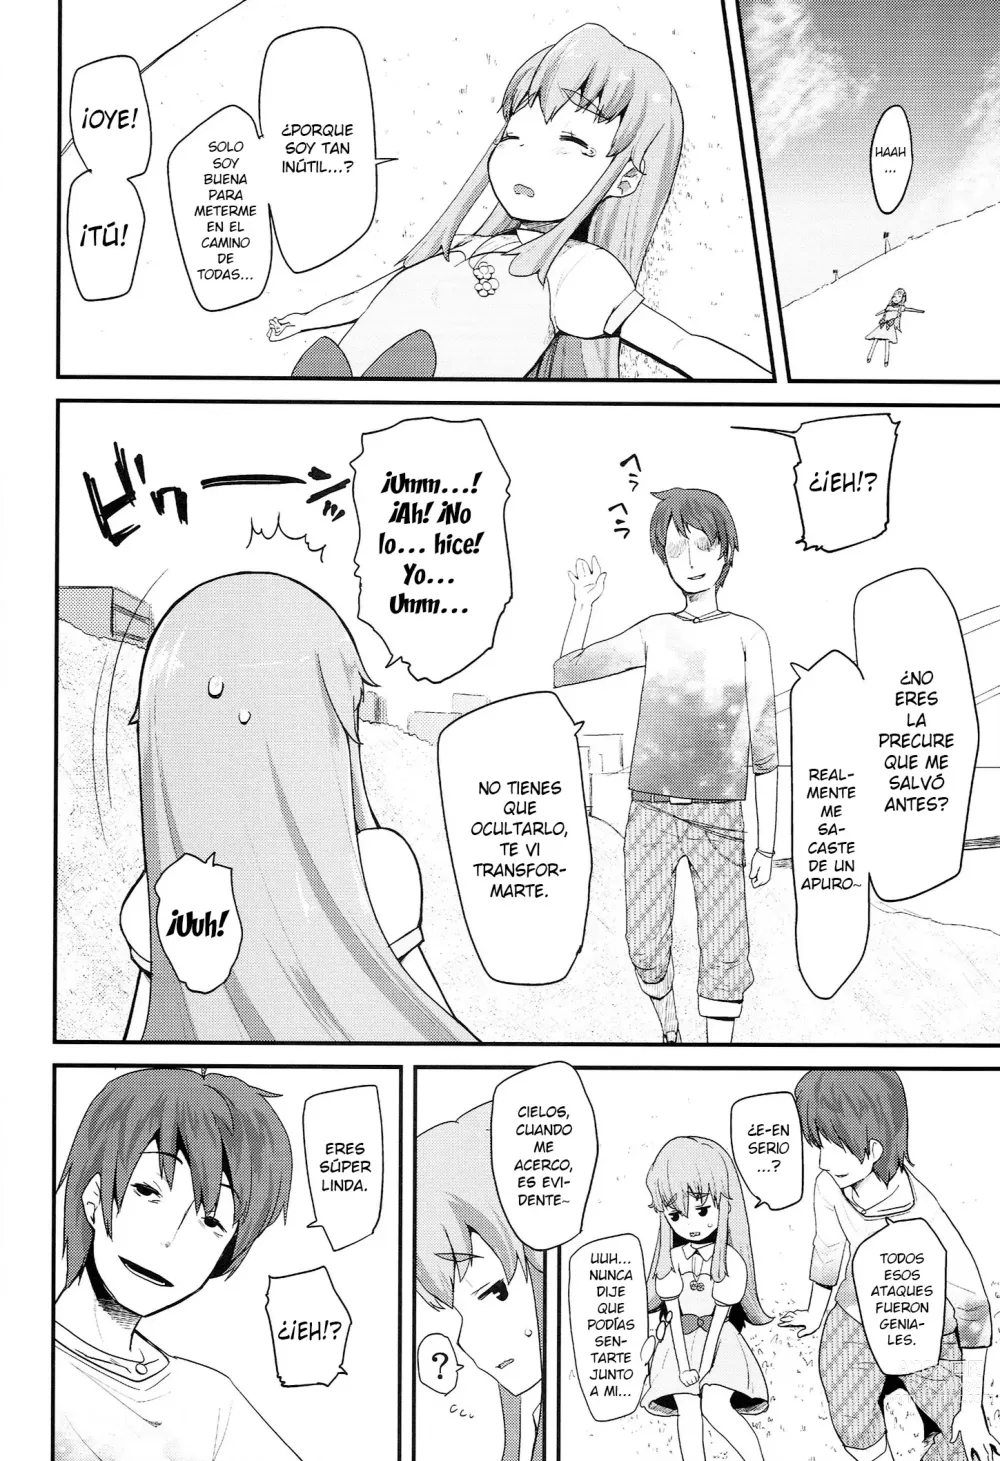 Page 7 of doujinshi Happiness experience 1 + 2